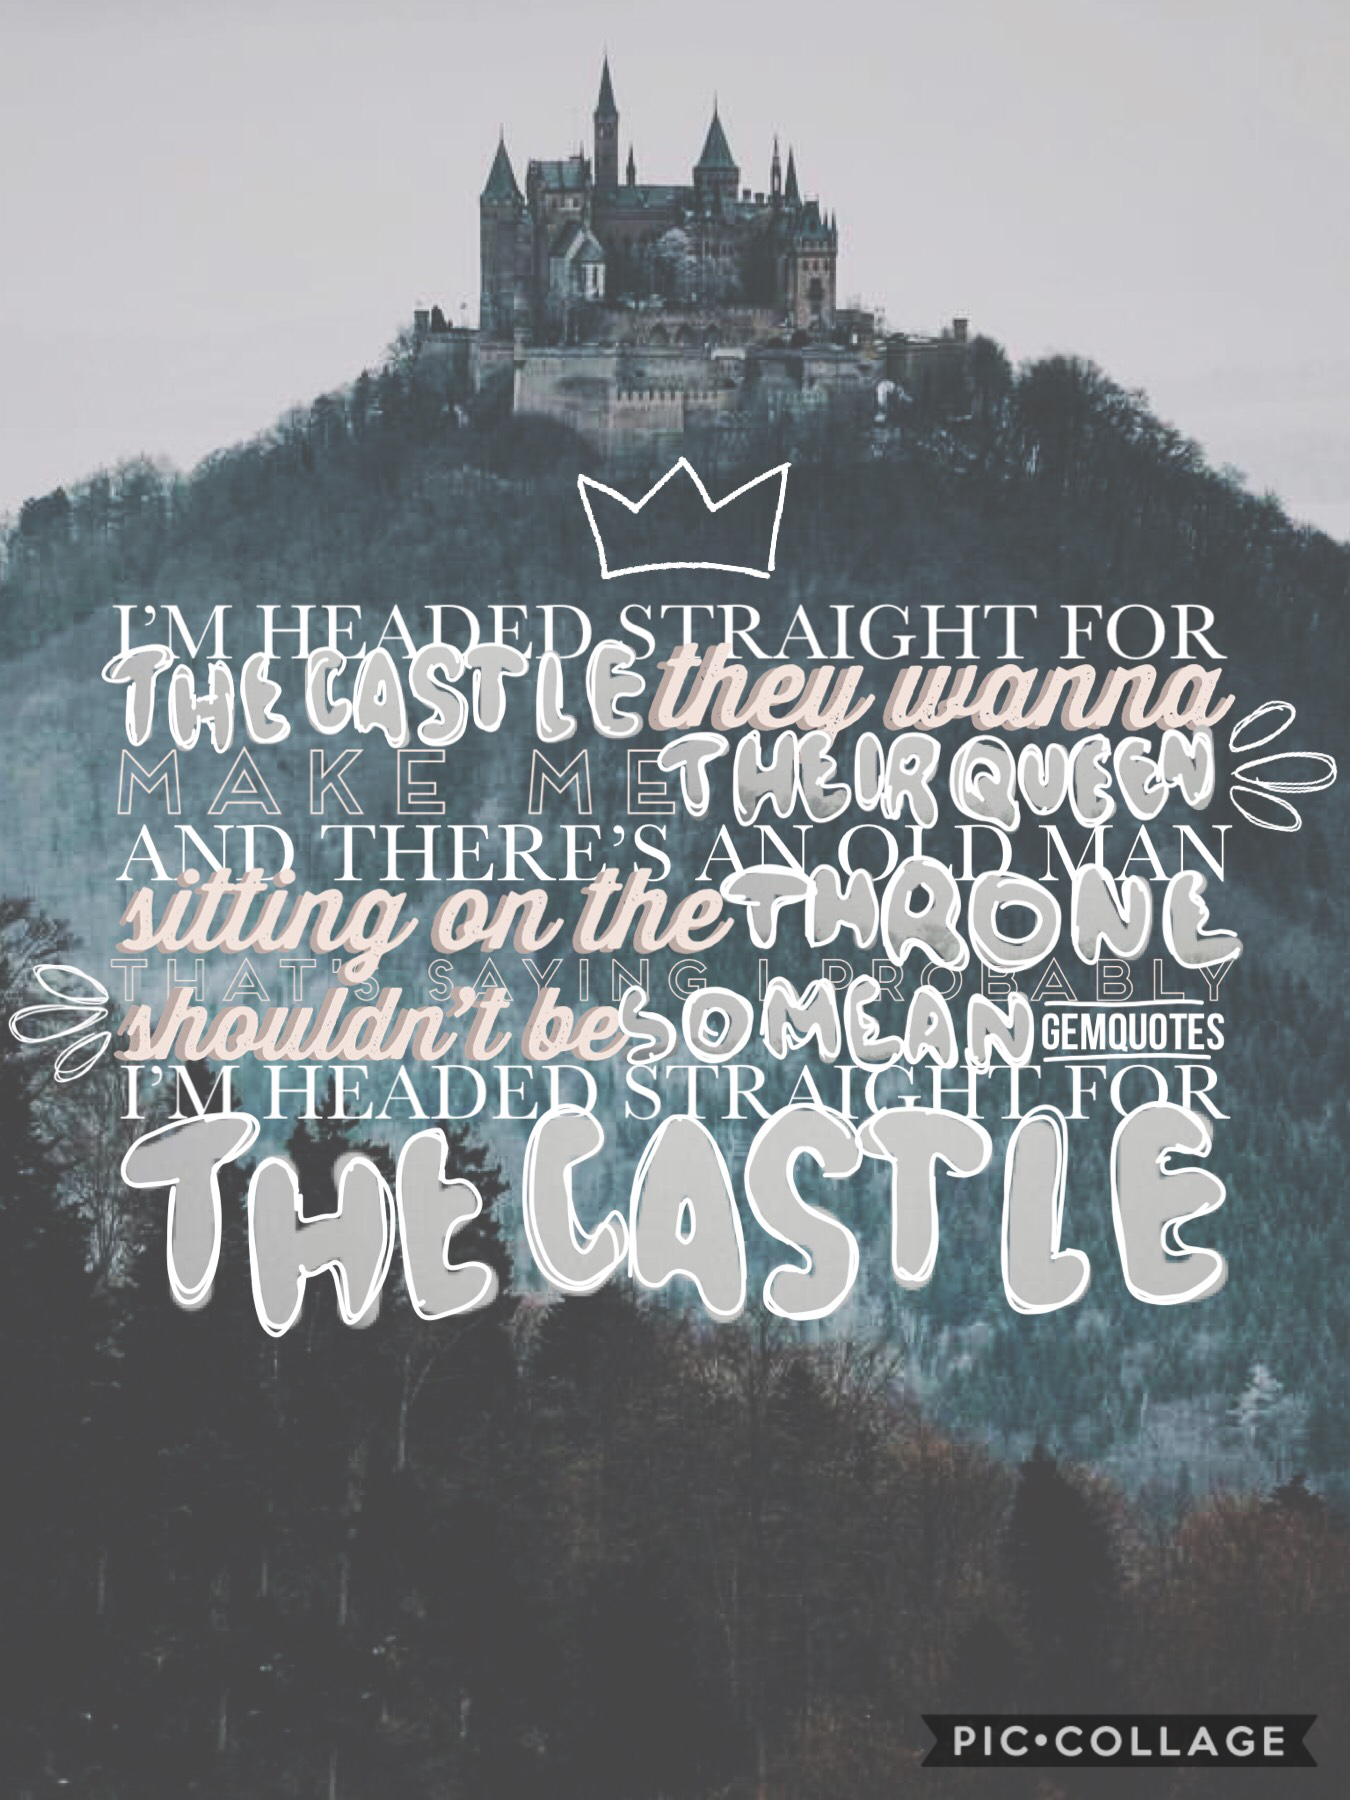 “👑 ţąƥ👑”
“Castle” by Halsey. Been listening to her today😁 and she’s pretty good, ima do more stuff from her. Hope u all are happy and healthy! I’ve been working on school stuff and other personal projects, so i’m busy😂 sending love and good health~❤️